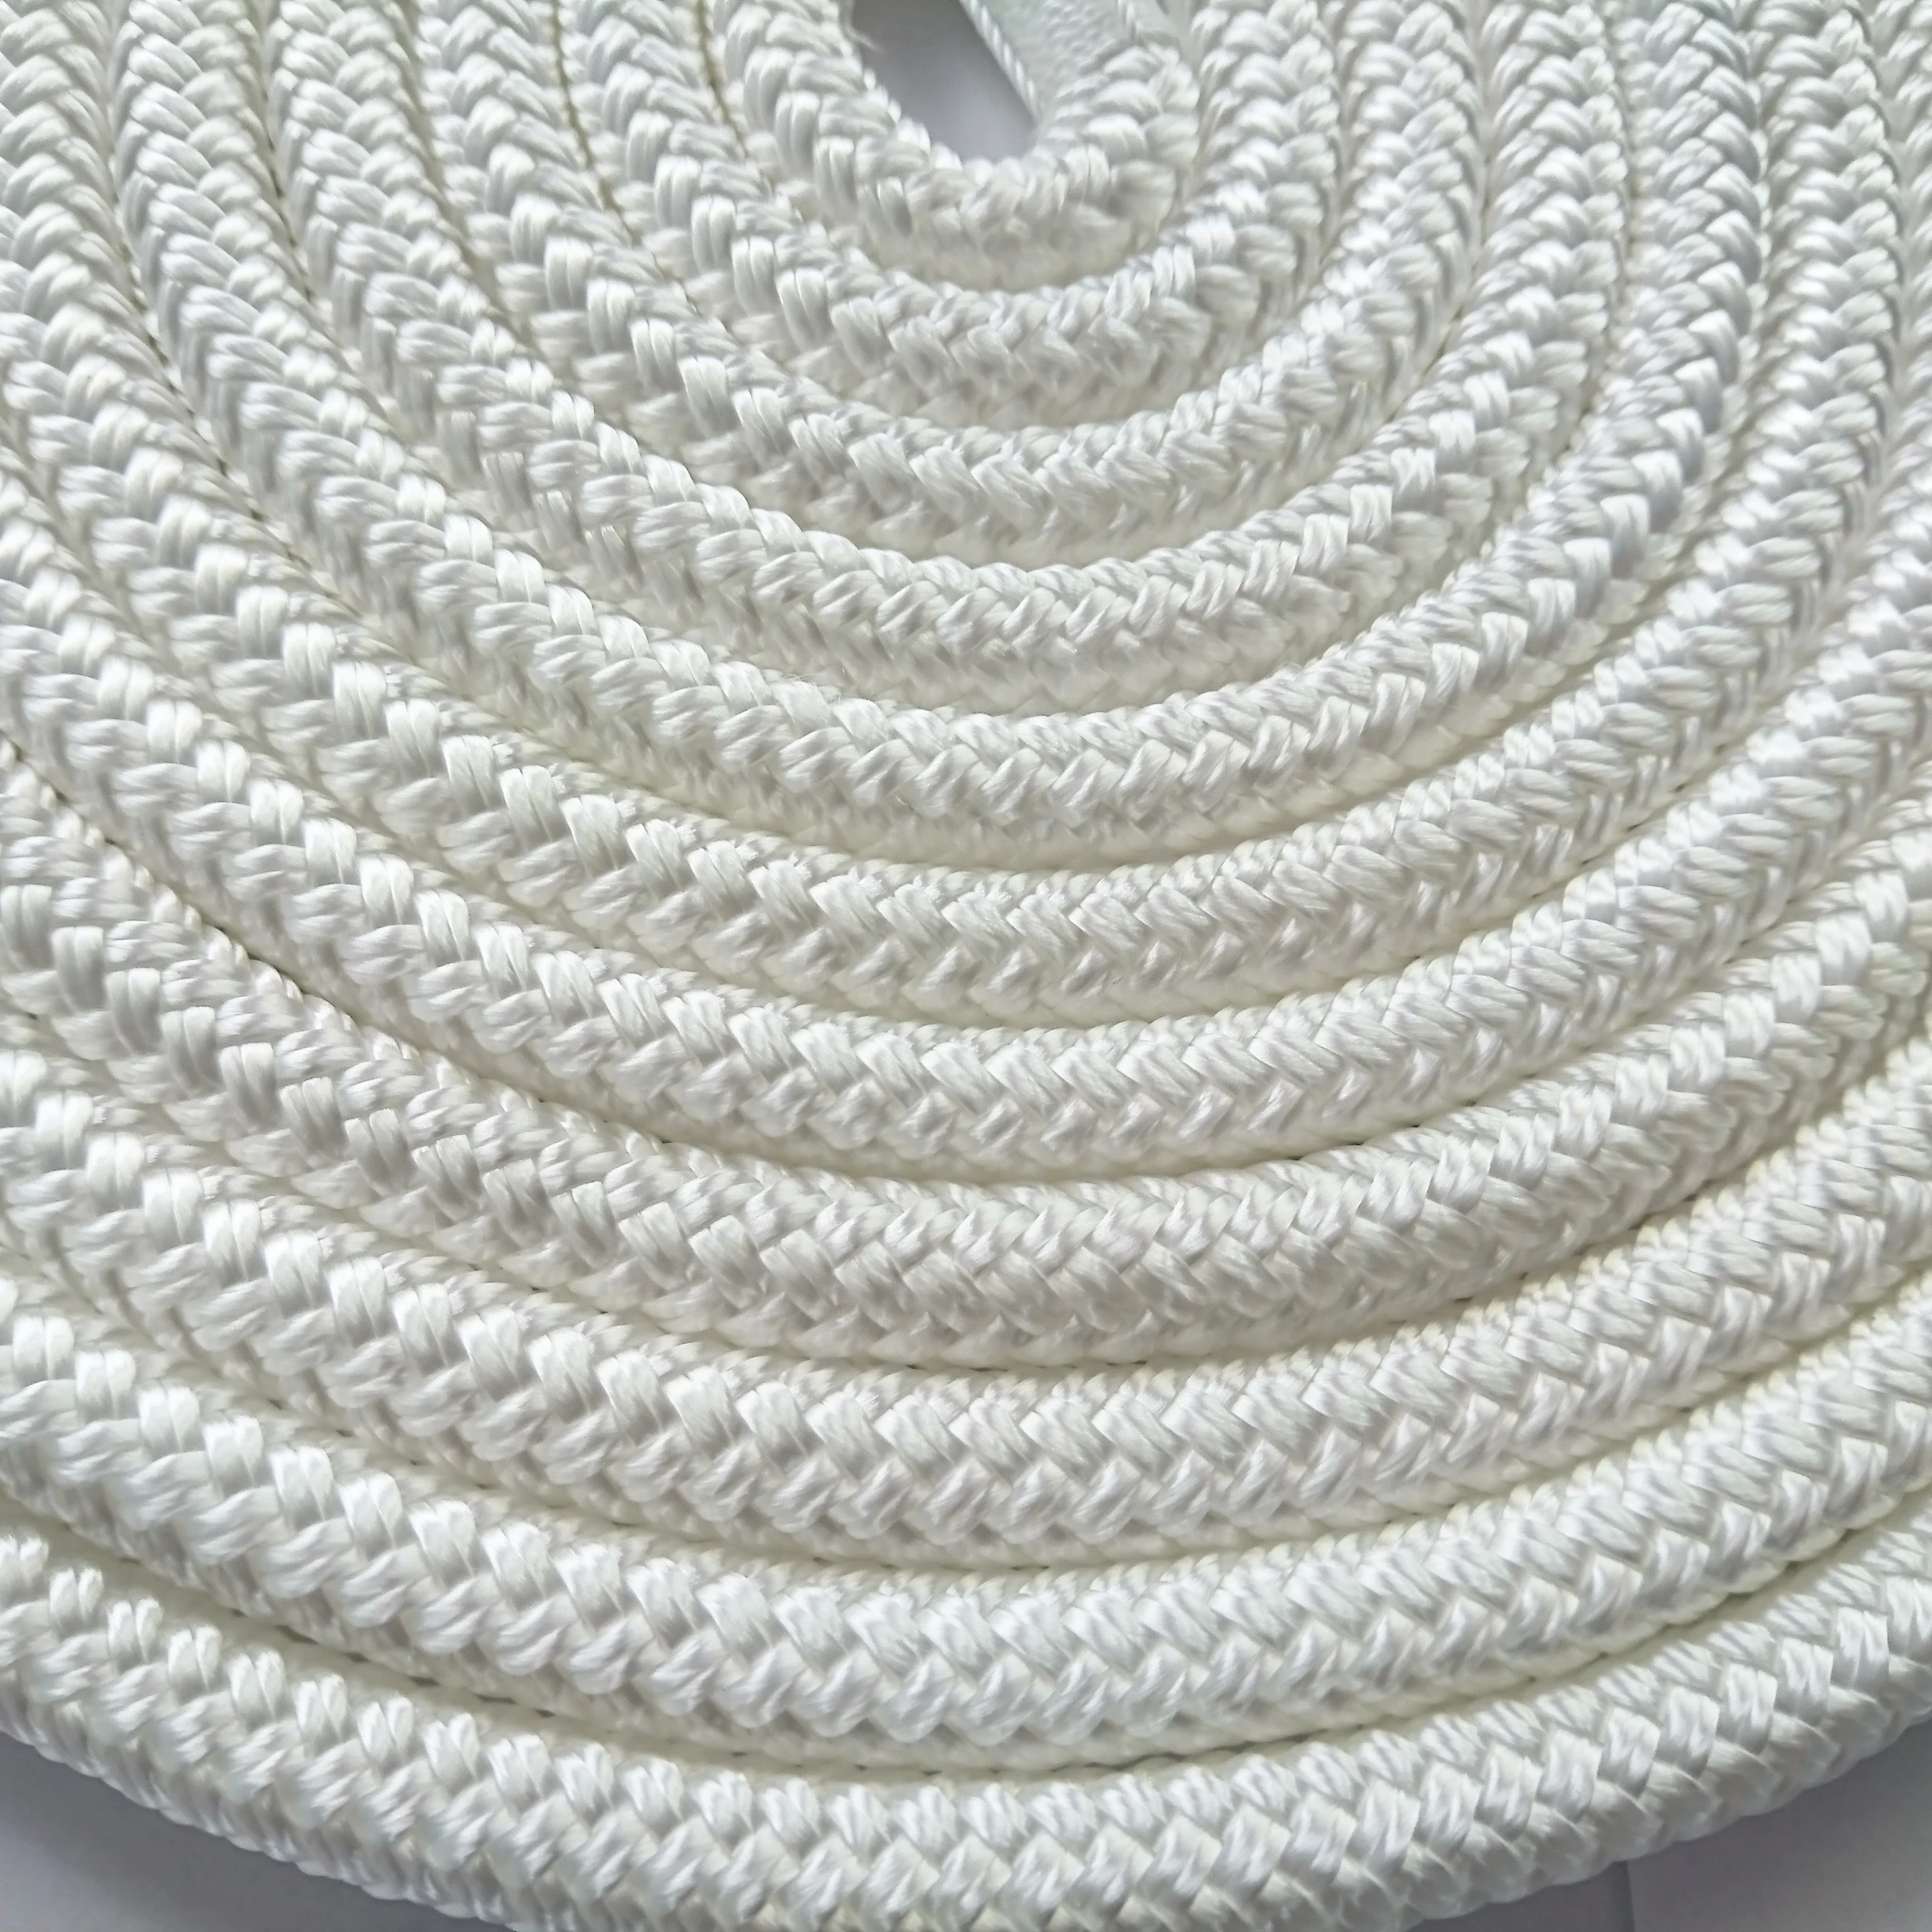 High performance customized package and size Double Braided line Nylon,polyester dock line for yacht, boat